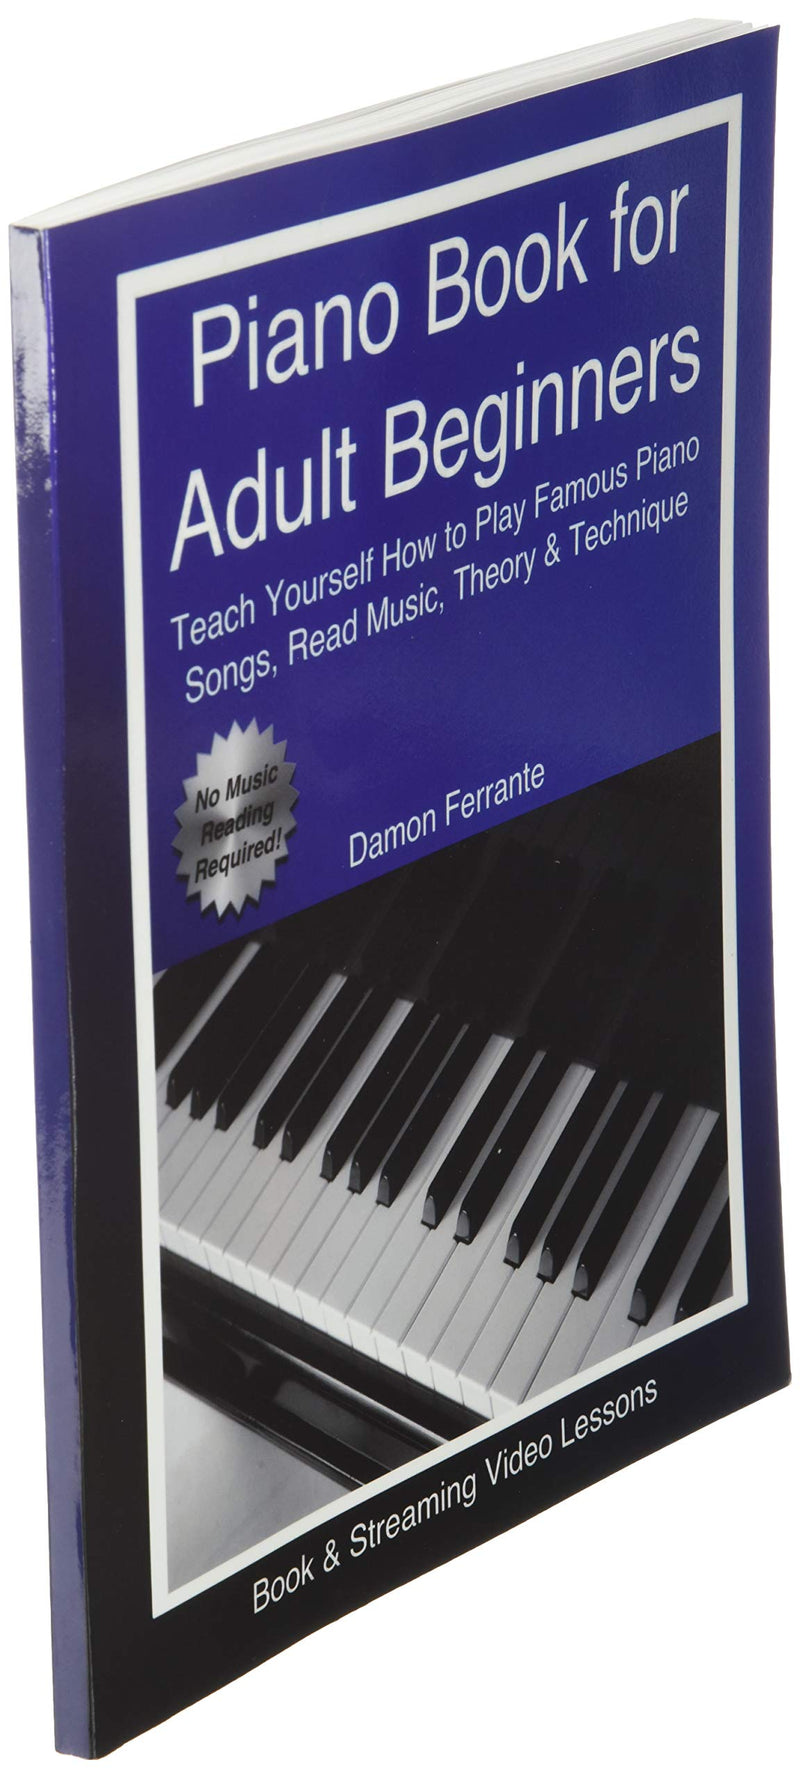 Piano Book for Adult Beginners: Teach Yourself How to Play Famous Piano Songs, Read Music, Theory & Technique (Online Streaming)